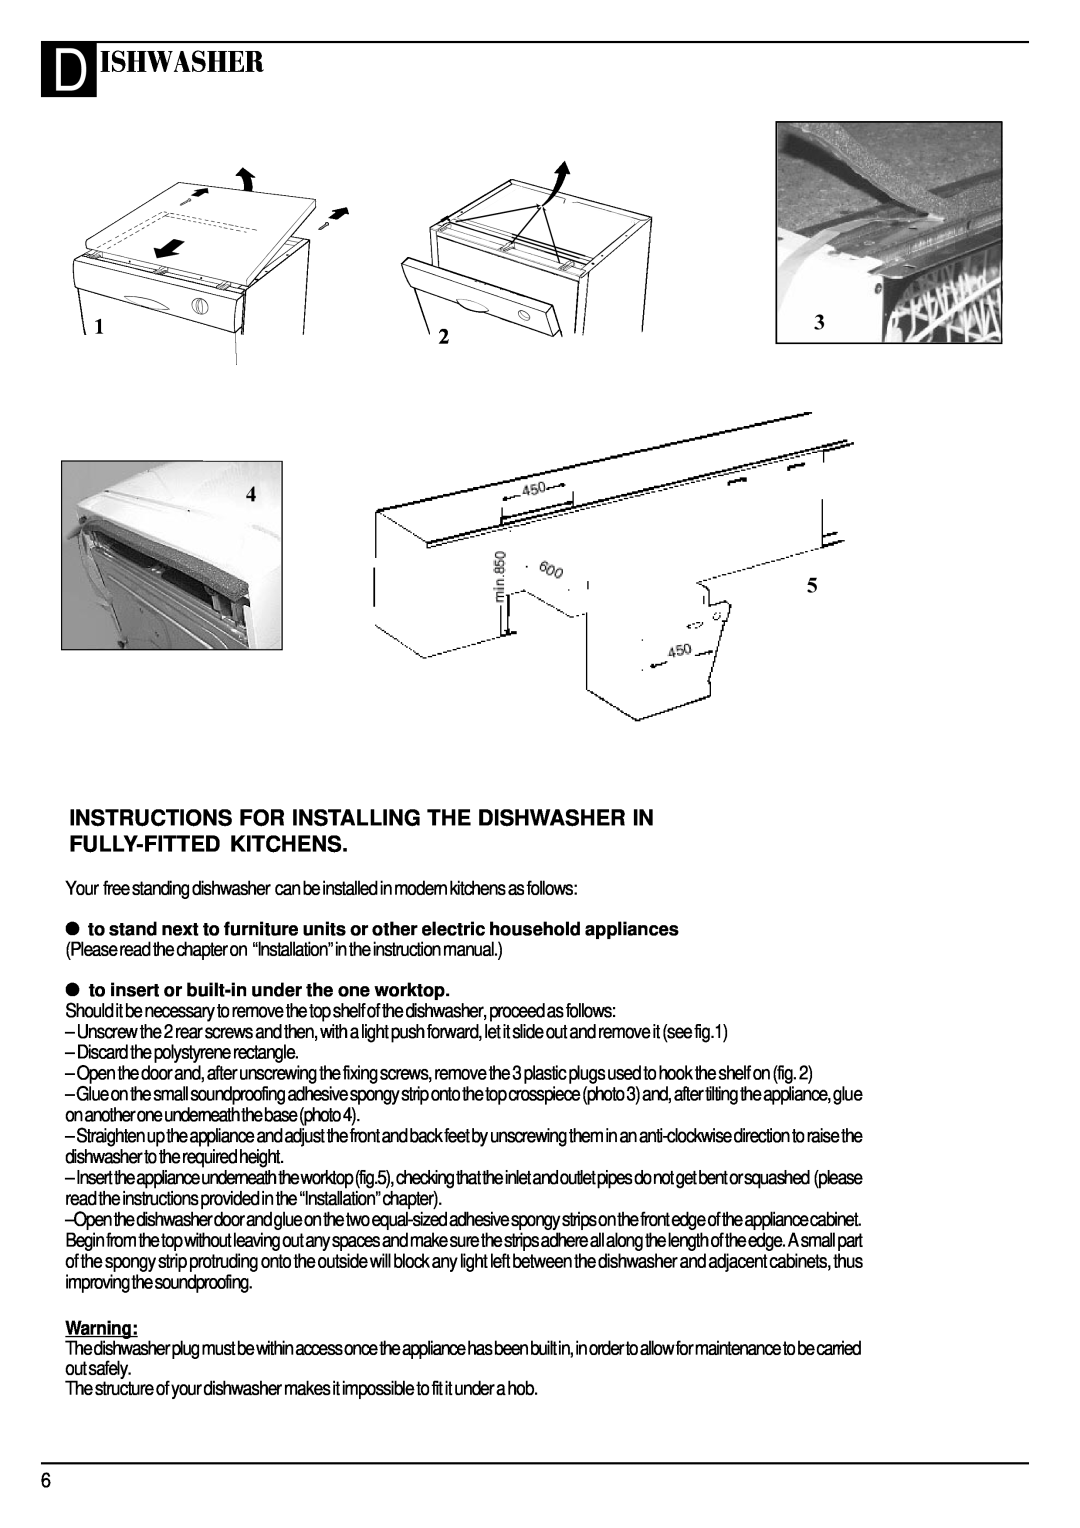 Hotpoint SDW 60 manual D Ishwasher, Instructions For Installing The Dishwasher In Fully-Fitted Kitchens 